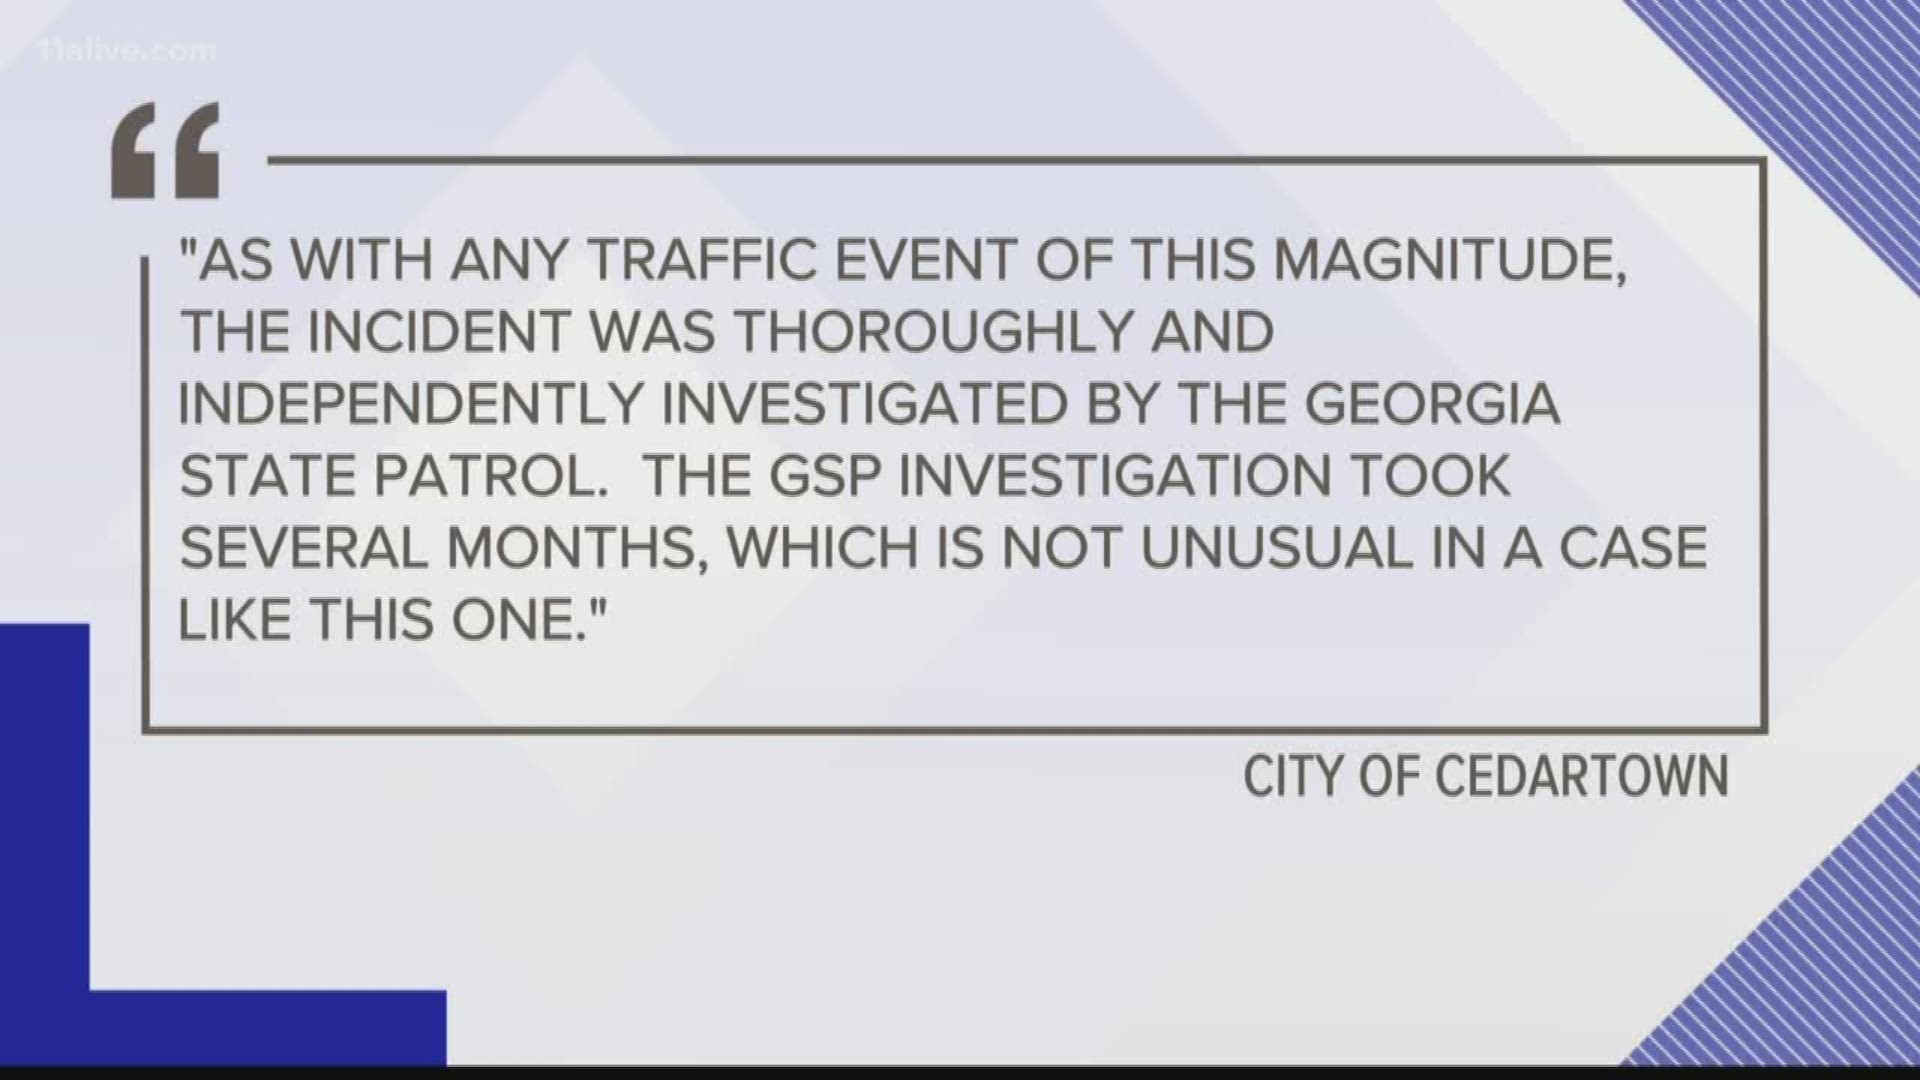 Here's what the City of Cedartown said.